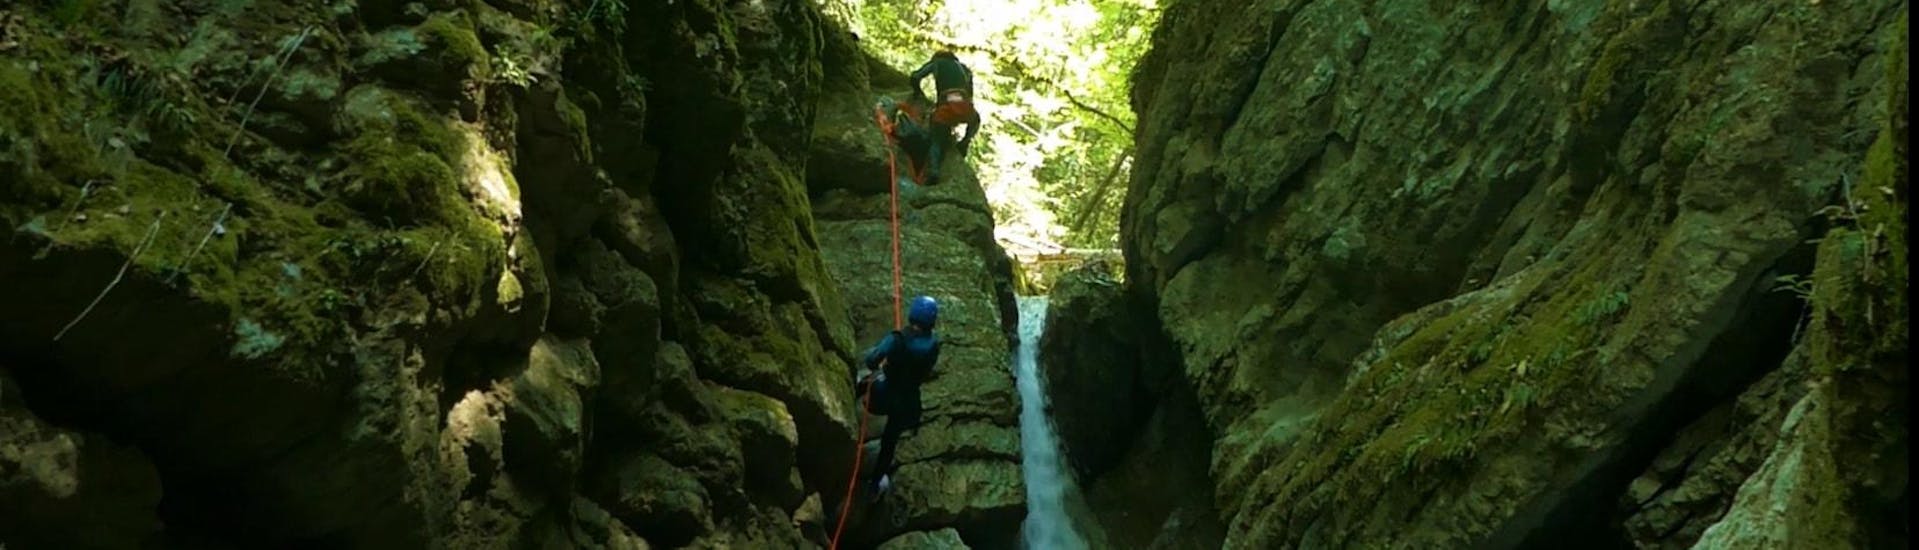 Canyoning bij Annecy in Canyon d'Angon, Talloires - Mailbox met Takamaka Annecy.